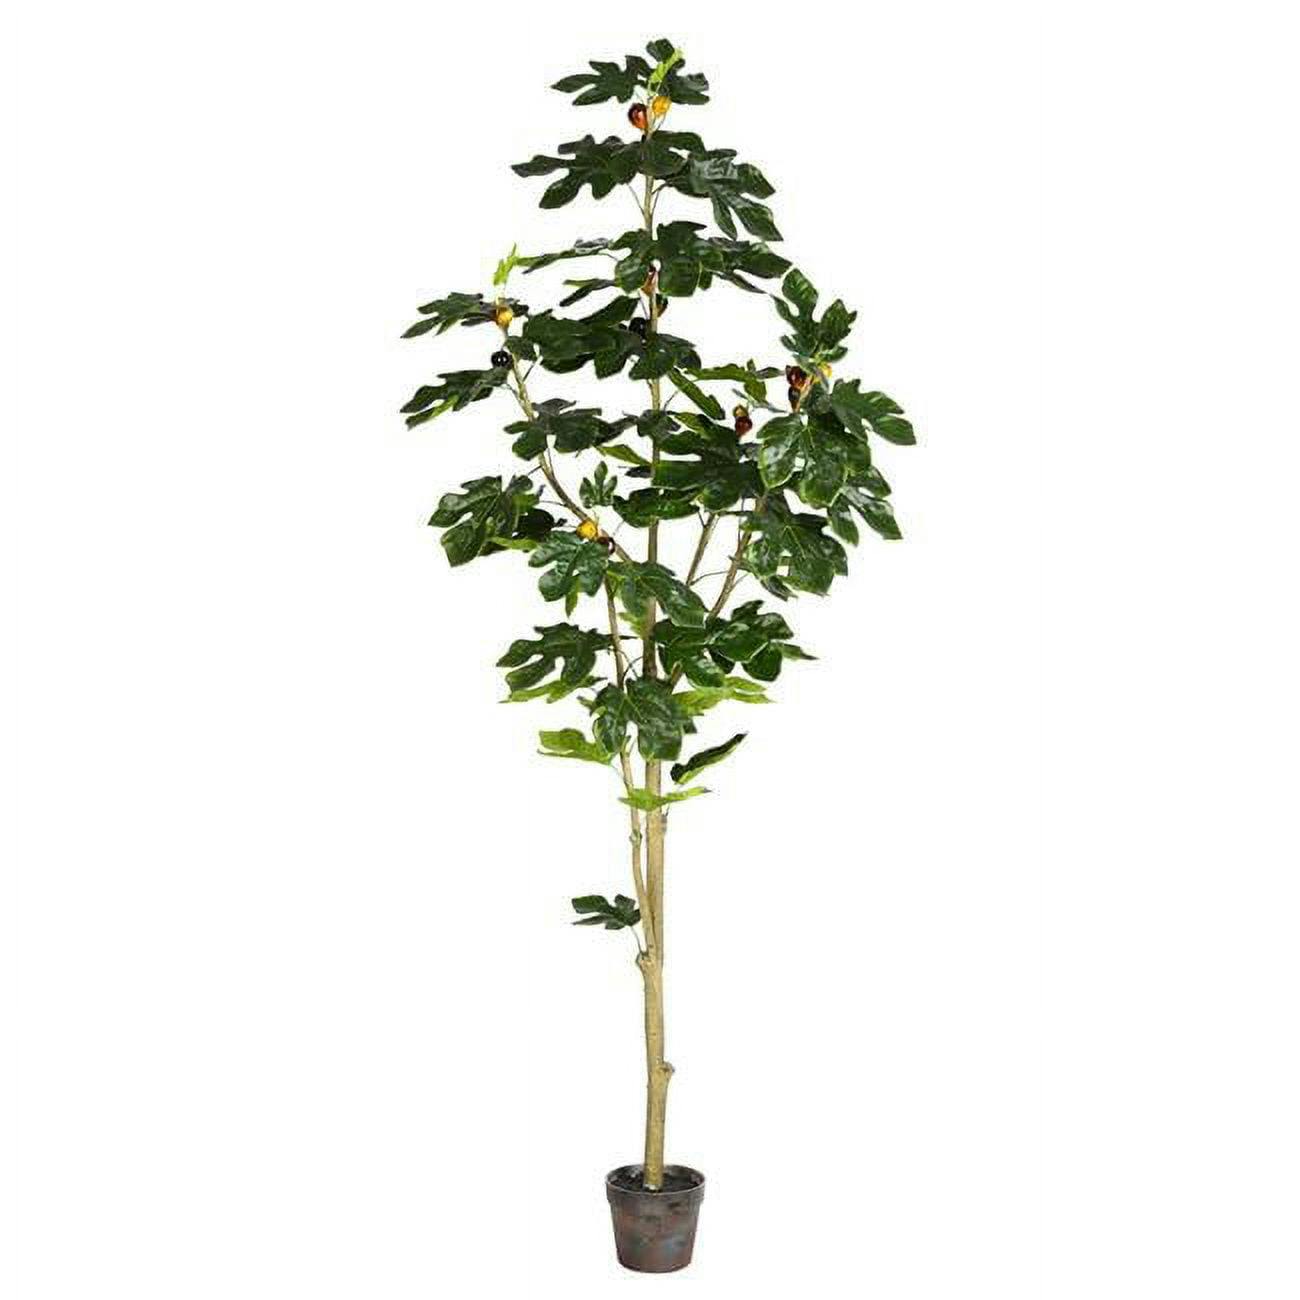 Festive 6' Lush Green Plastic Potted Fig Tree for Outdoor Christmas Decor